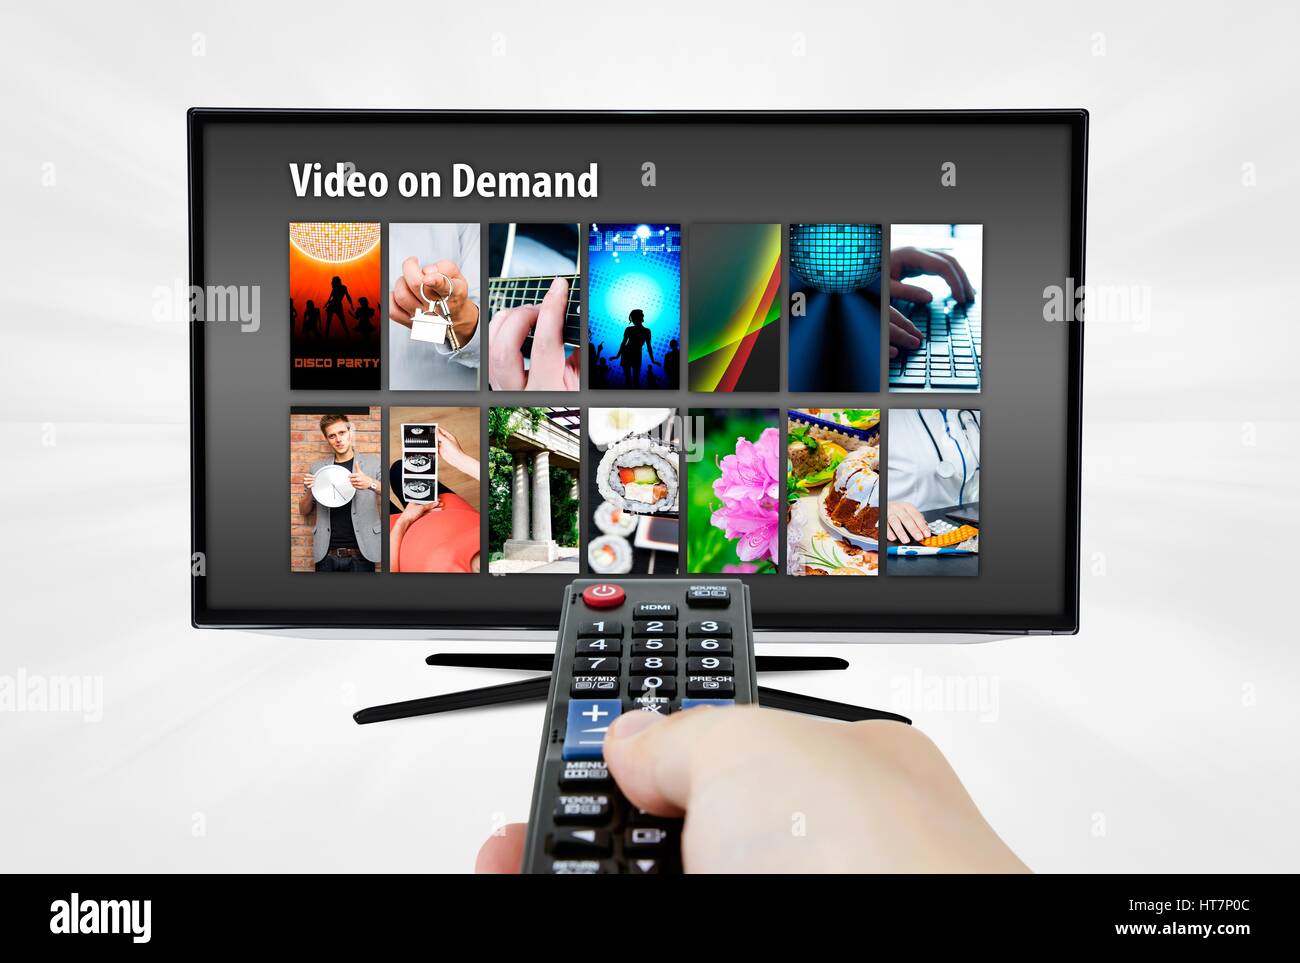 Video on demand VOD service on smart TV. Remote control in hand Stock Photo  - Alamy